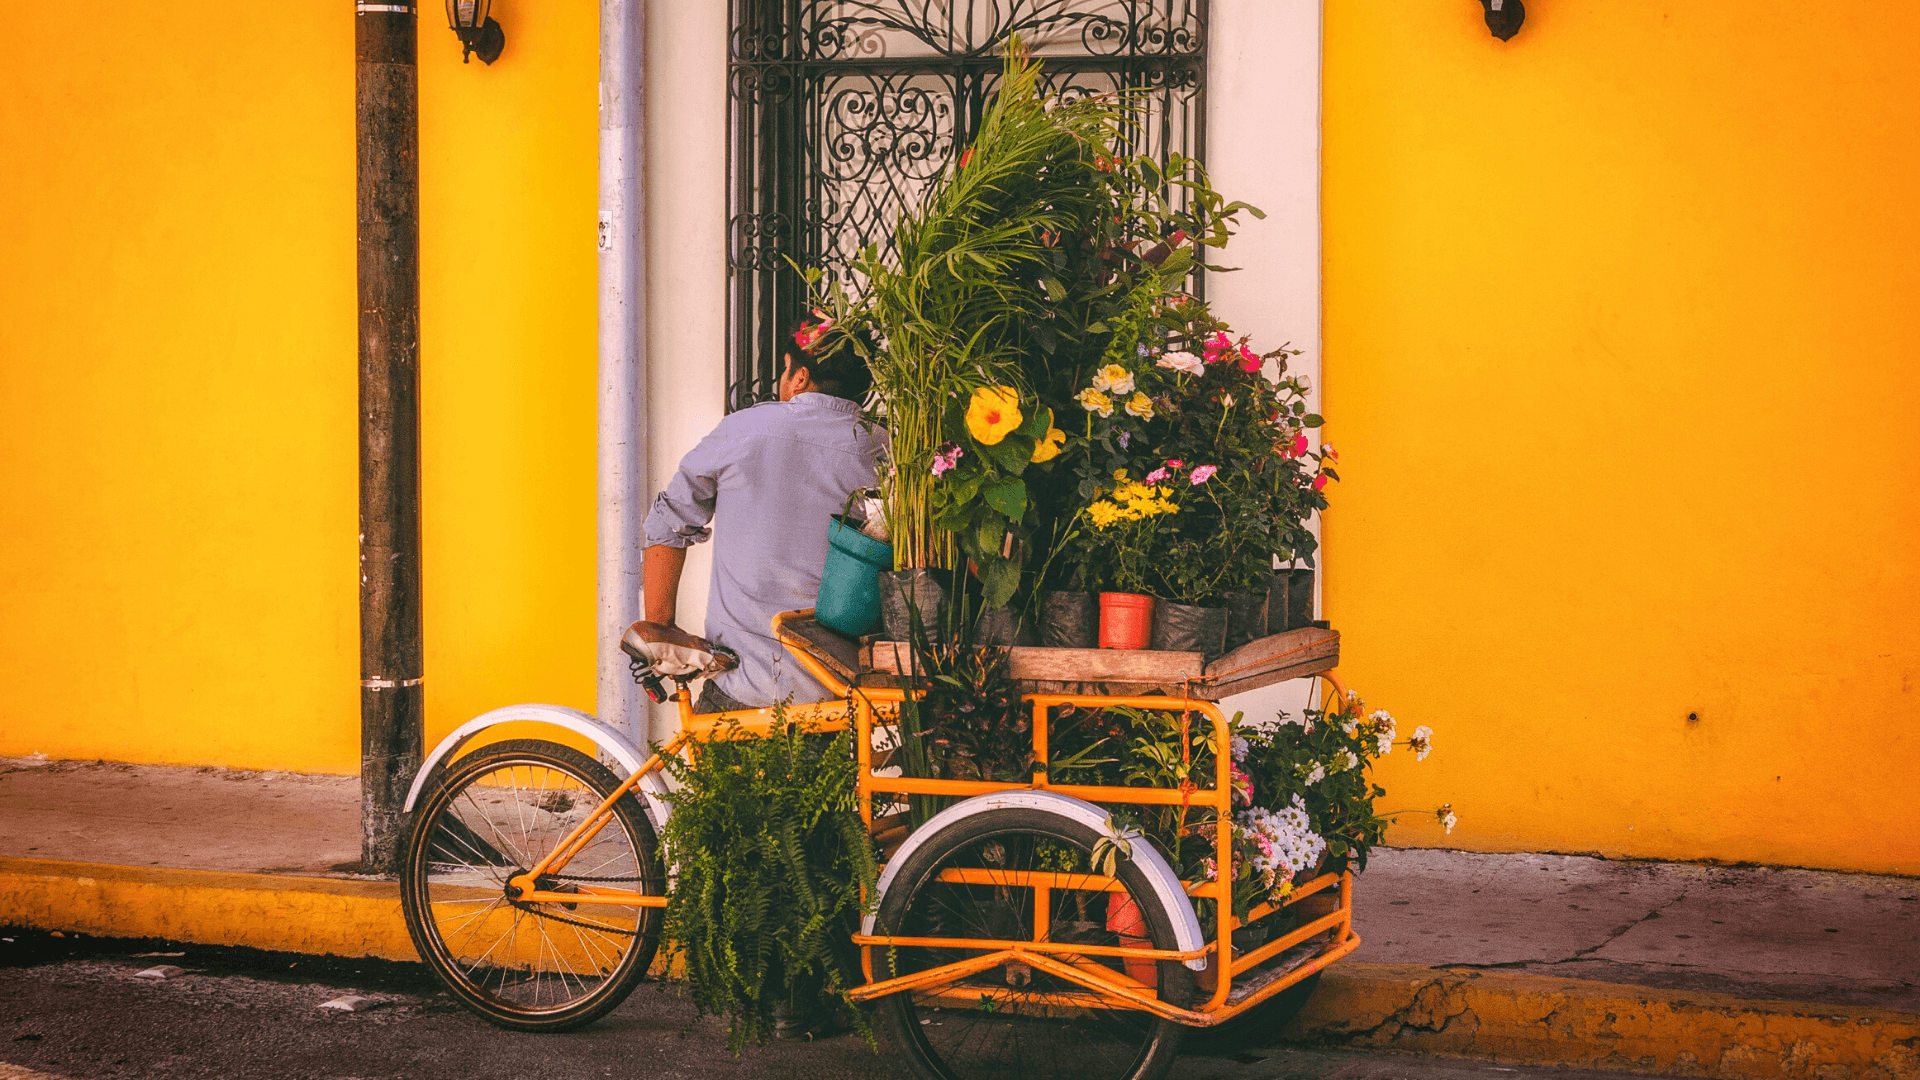 plant and flower vendor on a tricycle in front of a yellow house